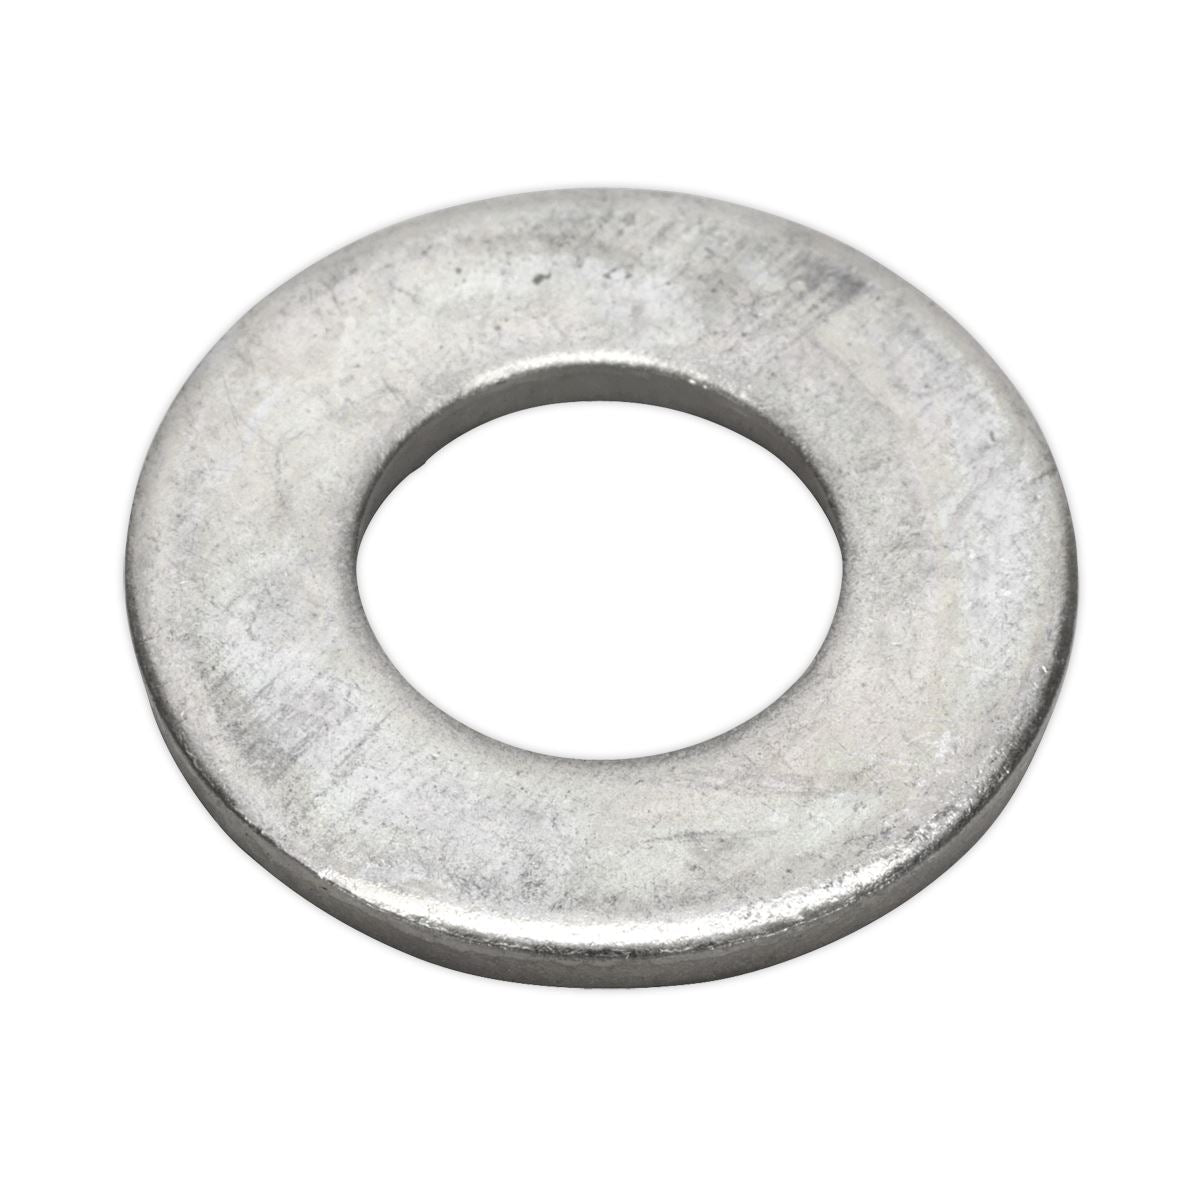 Sealey Flat Washer M12 x 28mm Form C Pack of 100